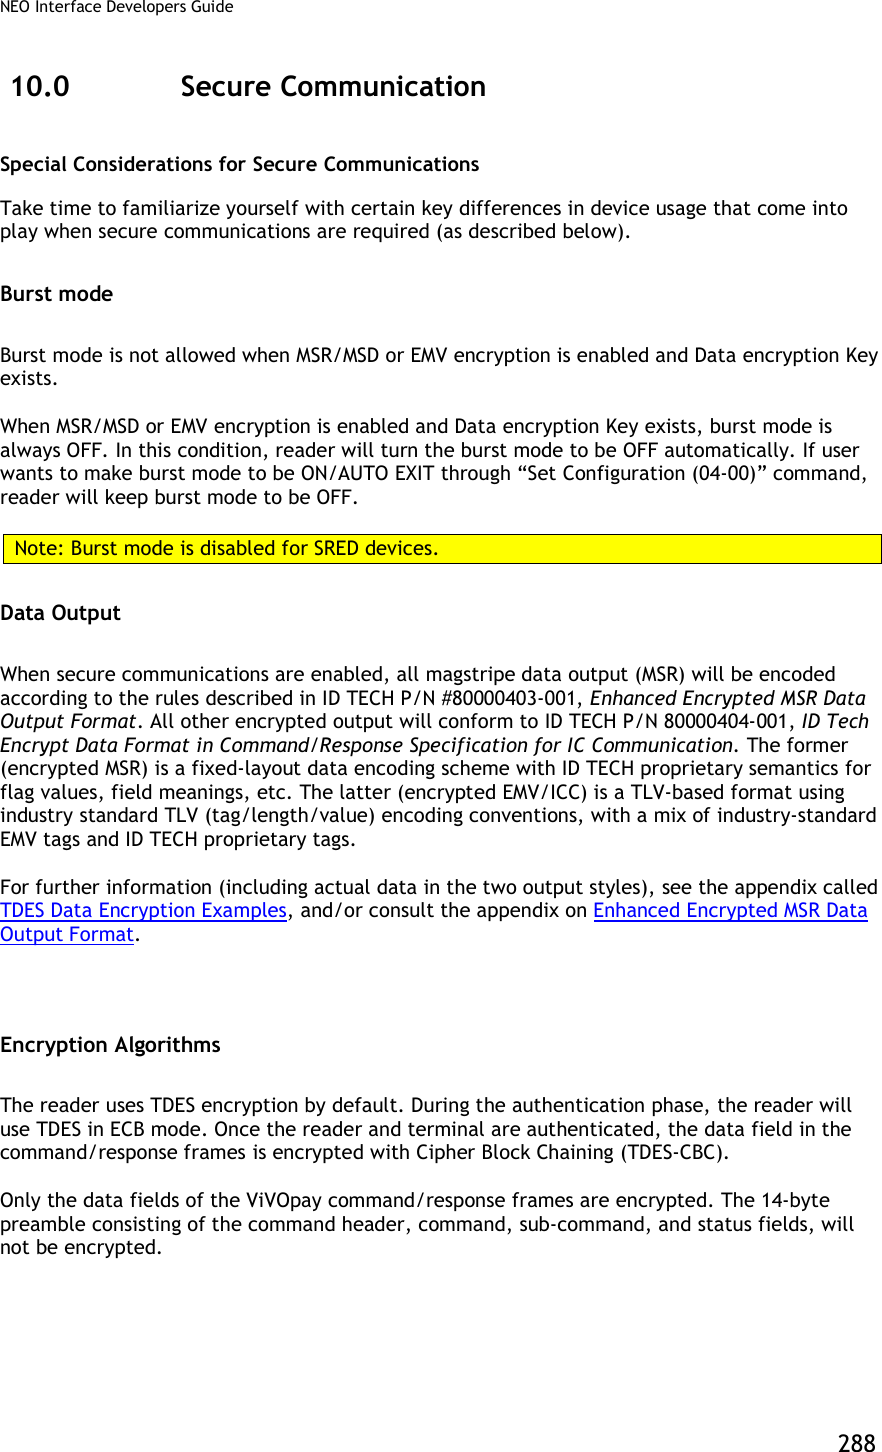 NEO Interface Developers Guide           288 10.0 Secure Communication Special Considerations for Secure Communications Take time to familiarize yourself with certain key differences in device usage that come into play when secure communications are required (as described below).  Burst mode Burst mode is not allowed when MSR/MSD or EMV encryption is enabled and Data encryption Key exists. When MSR/MSD or EMV encryption is enabled and Data encryption Key exists, burst mode is always OFF. In this condition, reader will turn the burst mode to be OFF automatically. If user wants to make burst mode to be ON/AUTO EXIT through “Set Configuration (04-00)” command, reader will keep burst mode to be OFF. Note: Burst mode is disabled for SRED devices. Data Output When secure communications are enabled, all magstripe data output (MSR) will be encoded according to the rules described in ID TECH P/N #80000403-001, Enhanced Encrypted MSR Data Output Format. All other encrypted output will conform to ID TECH P/N 80000404-001, ID Tech Encrypt Data Format in Command/Response Specification for IC Communication. The former (encrypted MSR) is a fixed-layout data encoding scheme with ID TECH proprietary semantics for flag values, field meanings, etc. The latter (encrypted EMV/ICC) is a TLV-based format using industry standard TLV (tag/length/value) encoding conventions, with a mix of industry-standard EMV tags and ID TECH proprietary tags.  For further information (including actual data in the two output styles), see the appendix called TDES Data Encryption Examples, and/or consult the appendix on Enhanced Encrypted MSR Data Output Format.  Encryption Algorithms The reader uses TDES encryption by default. During the authentication phase, the reader will use TDES in ECB mode. Once the reader and terminal are authenticated, the data field in the command/response frames is encrypted with Cipher Block Chaining (TDES-CBC). Only the data fields of the ViVOpay command/response frames are encrypted. The 14-byte preamble consisting of the command header, command, sub-command, and status fields, will not be encrypted. 